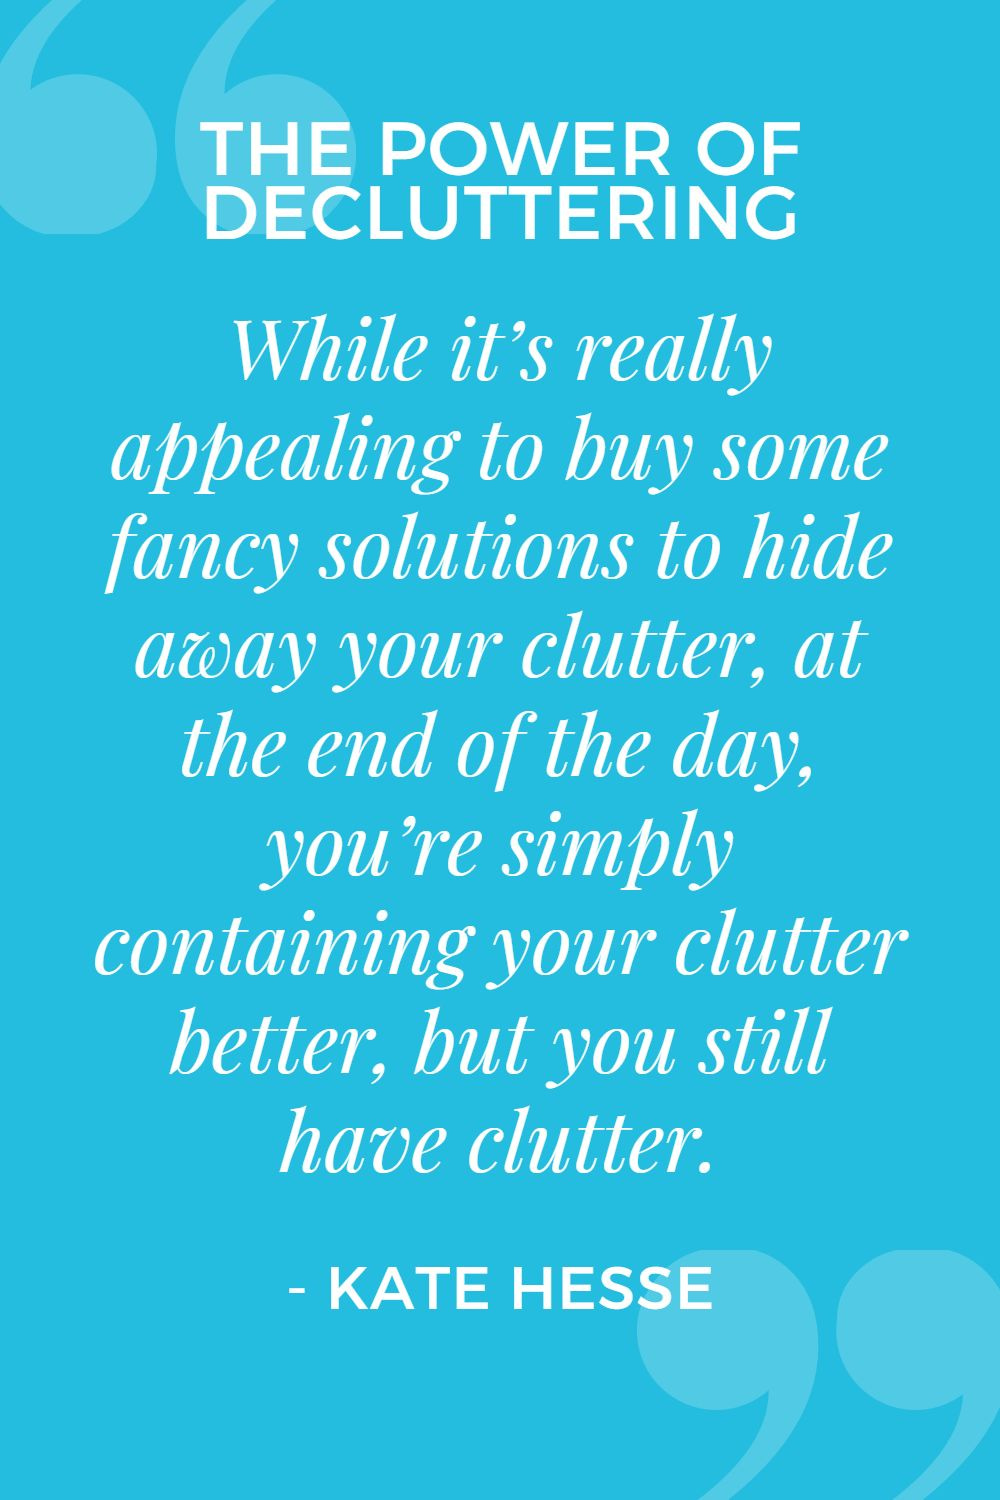 While it's really appealing to buy some fancy solutions to hide away your clutter, at the end of the day, you're simply containing your clutter better, but you still have clutter.